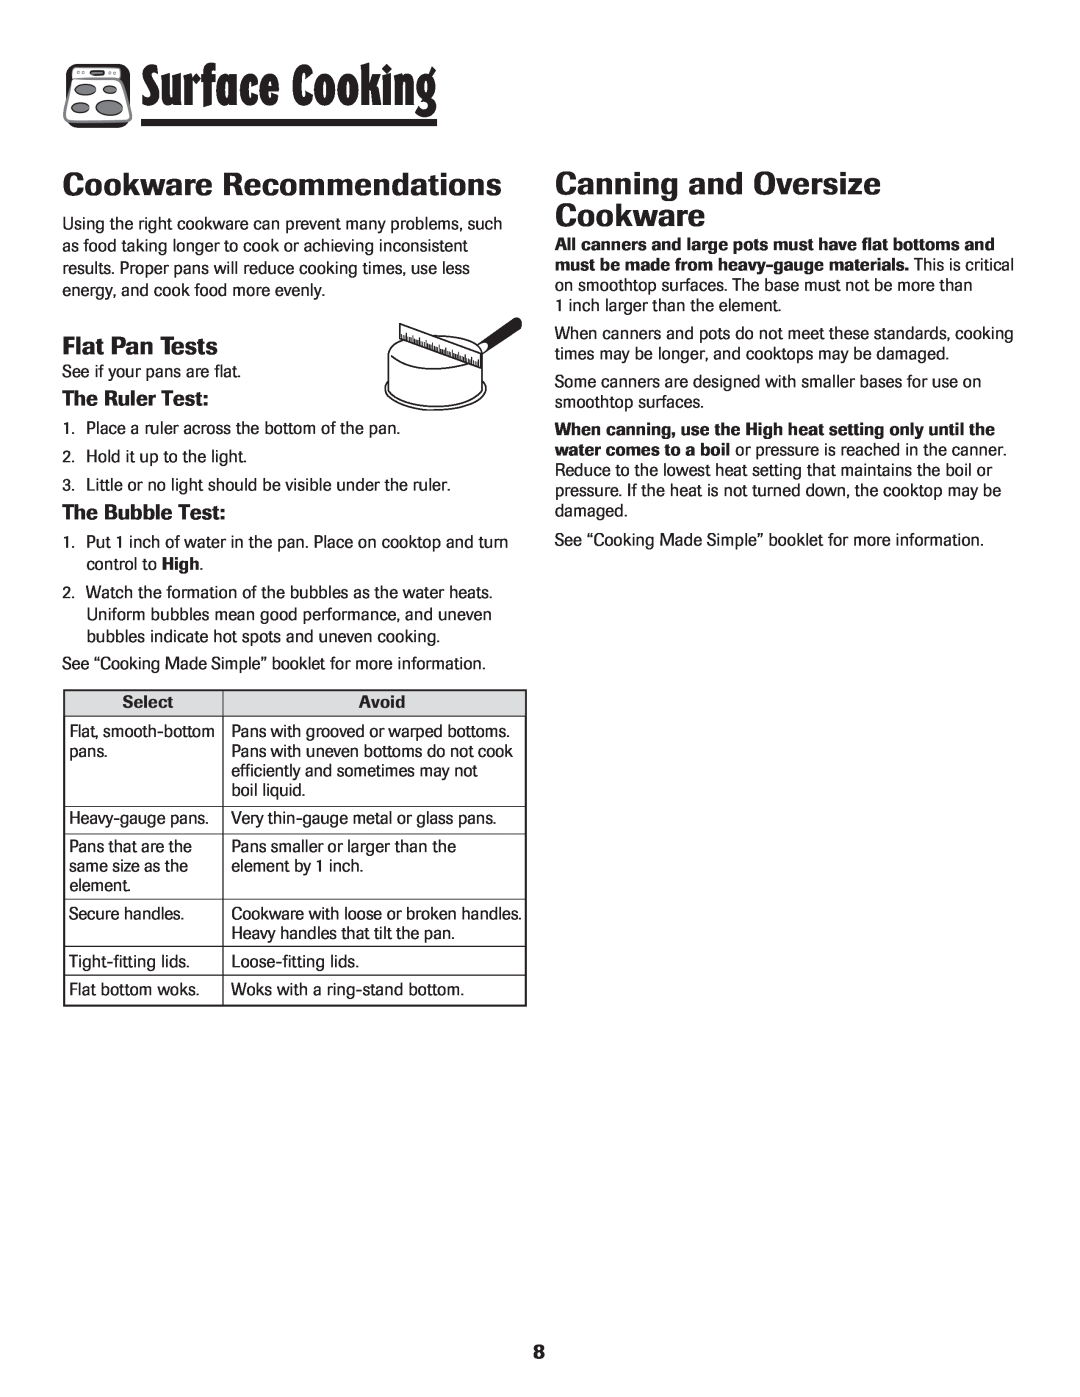 Amana 8113P454-60 Cookware Recommendations, Canning and Oversize Cookware, Flat Pan Tests, The Ruler Test, The Bubble Test 